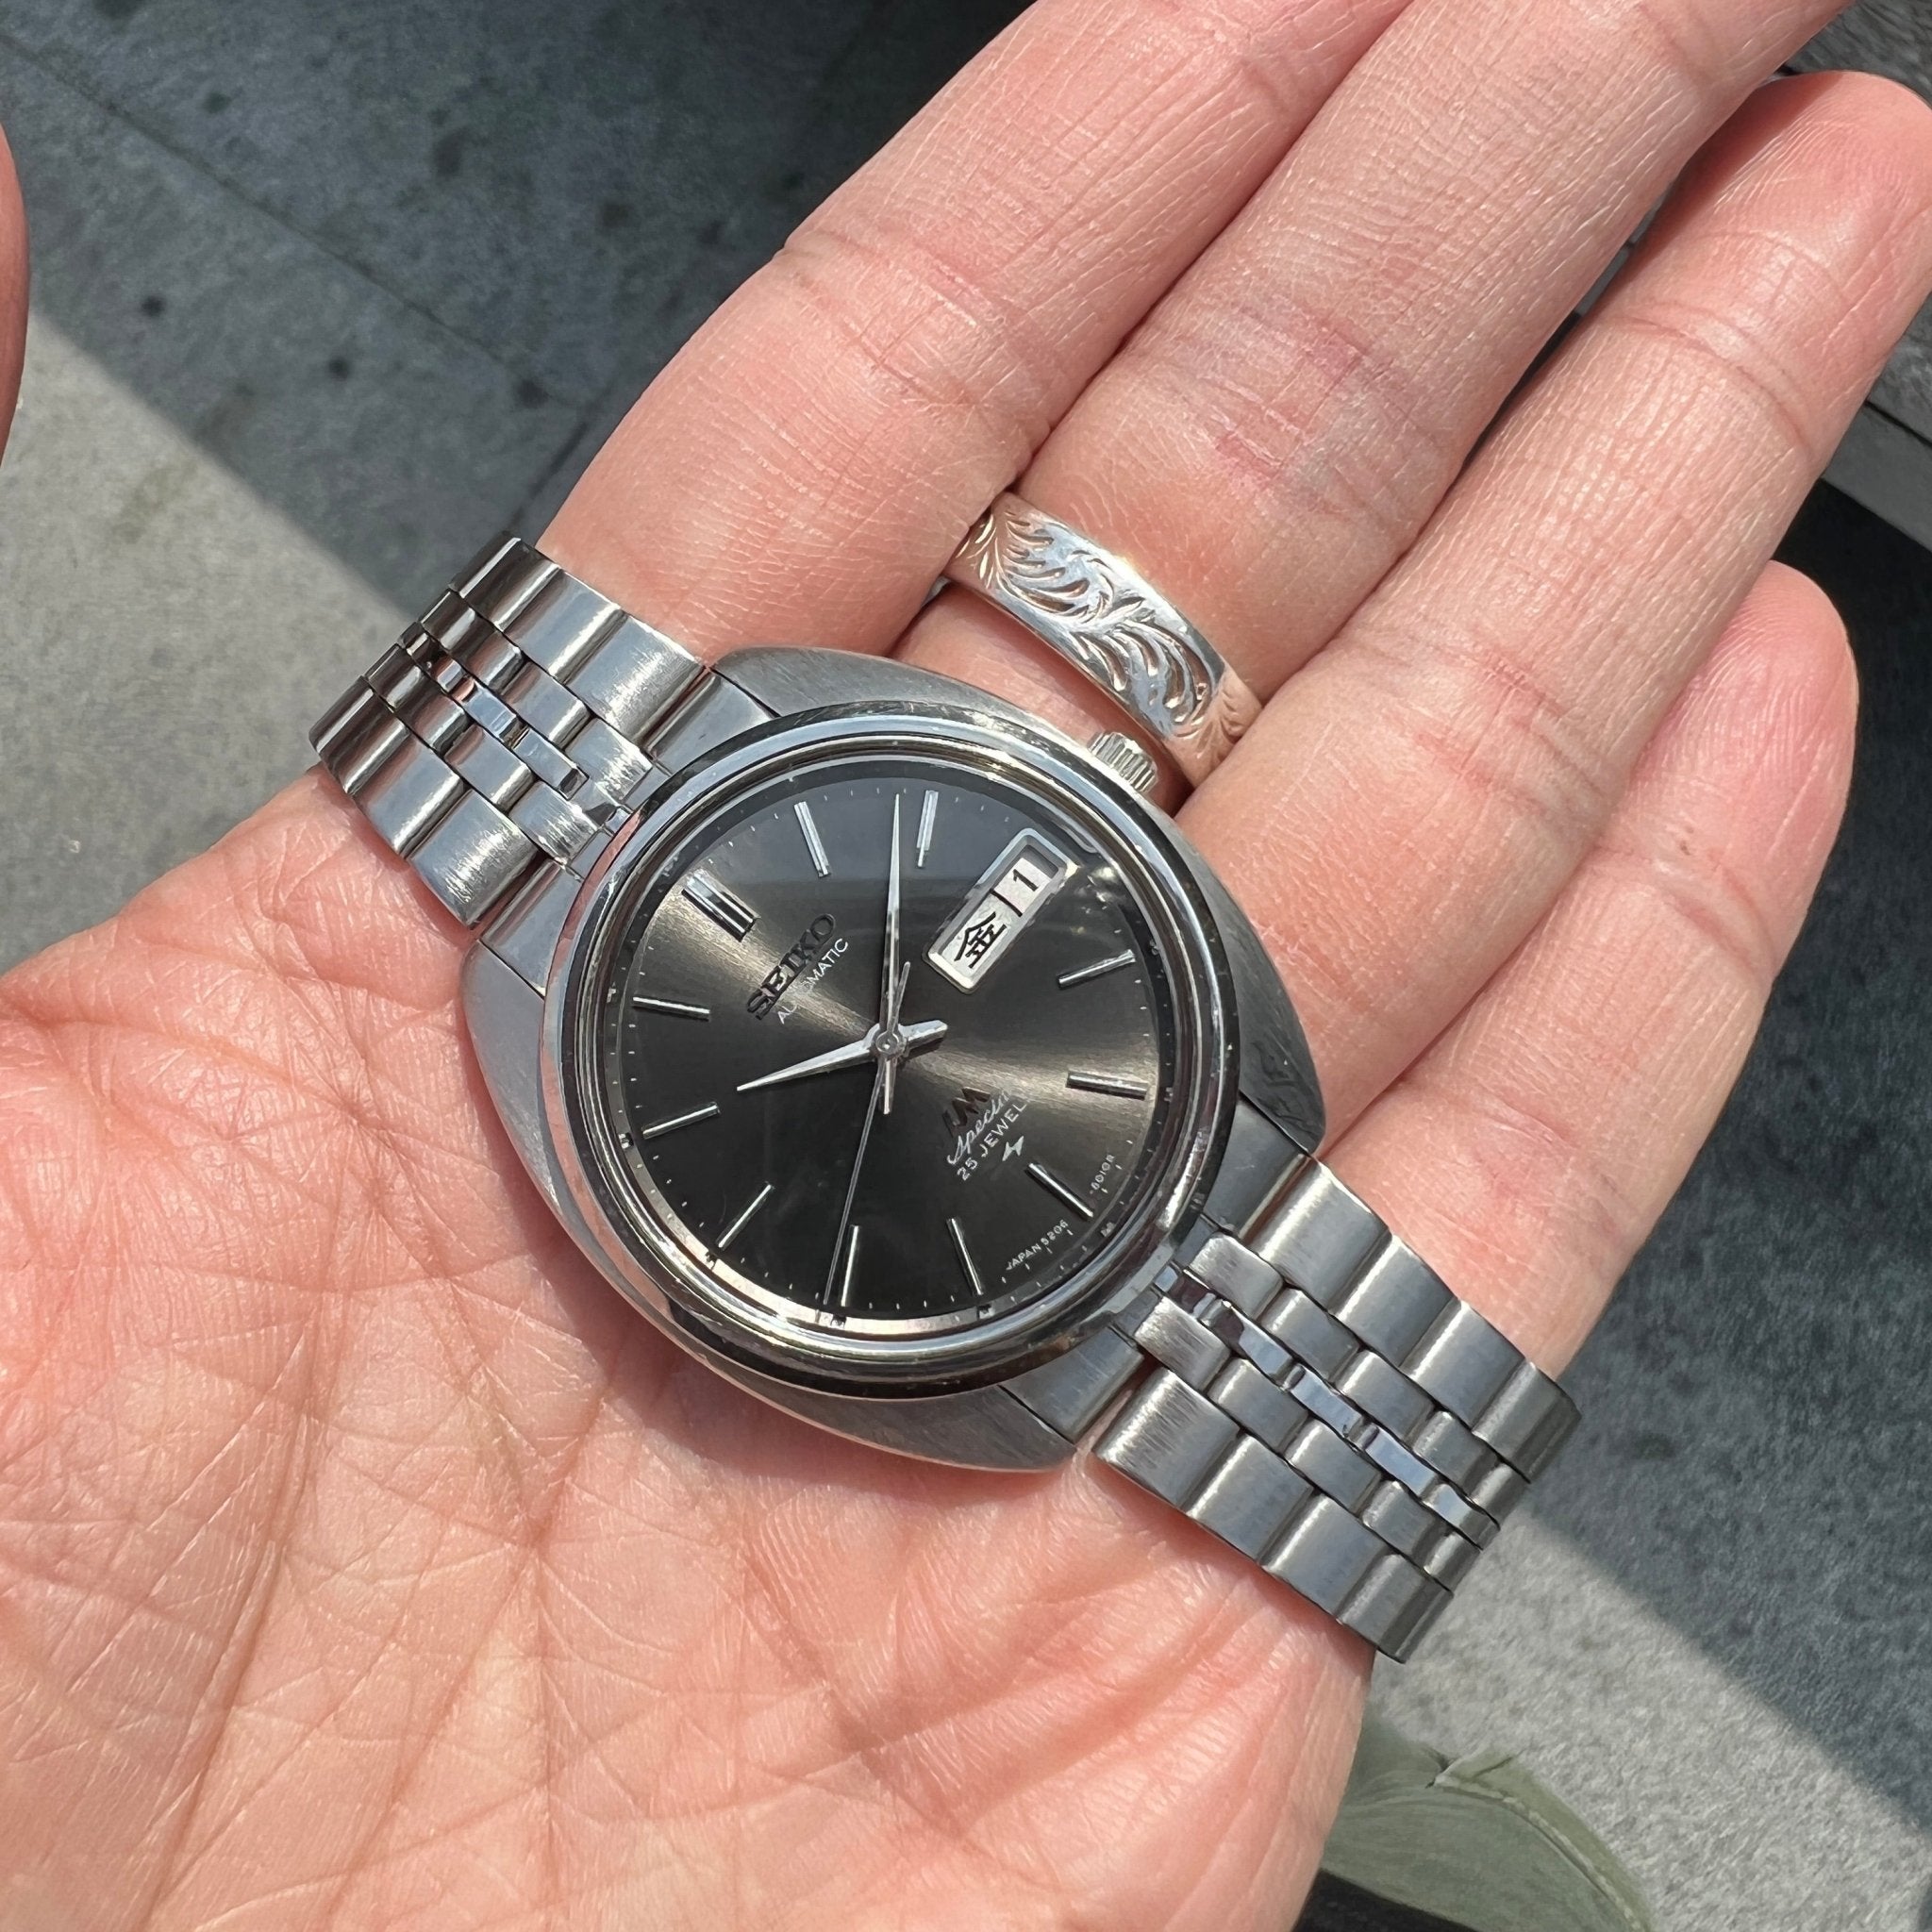 Vintage Watch | Seiko Lord Matic Special 5206 - Samurai Vintage Co.